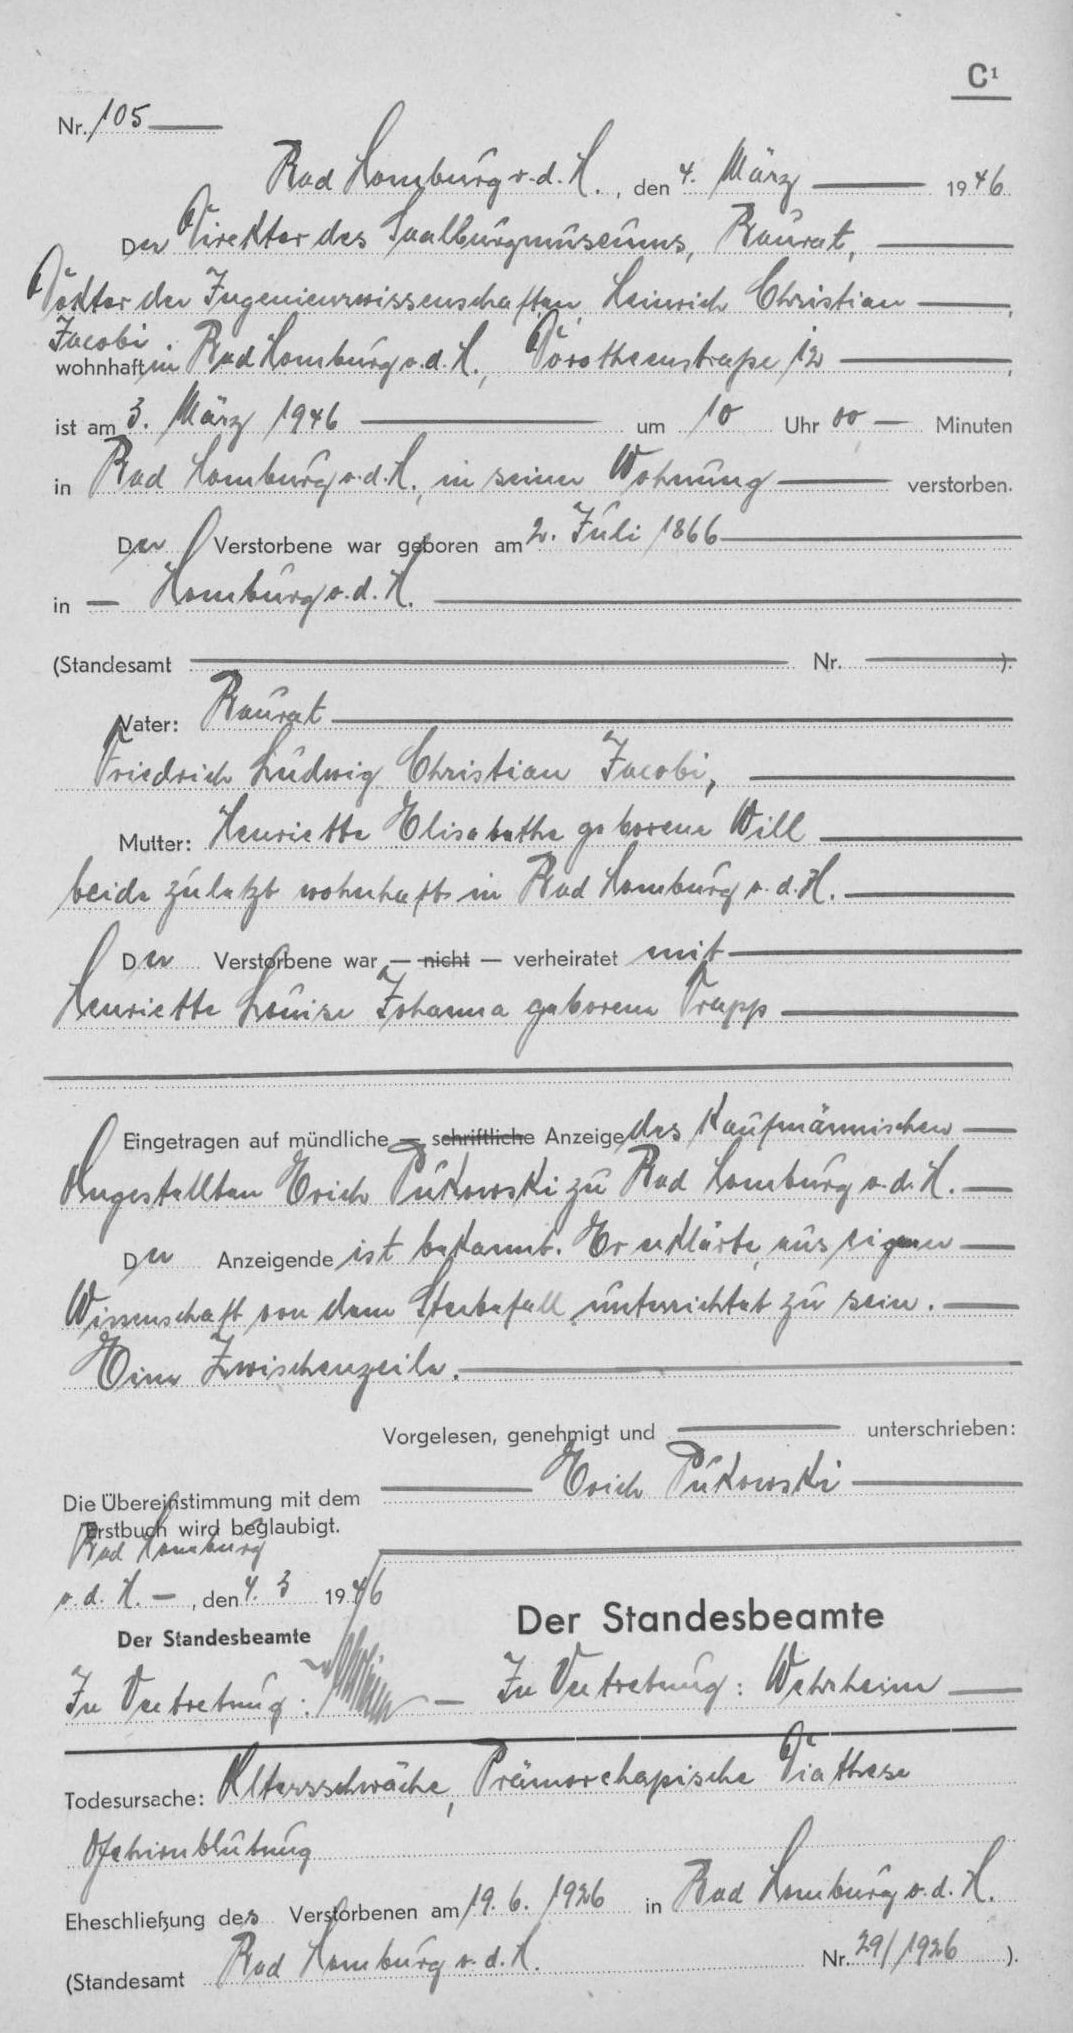 Death record of Heinrich Christian Jacobi [Credit: MyHeritage Germany, Hesse, Deaths]